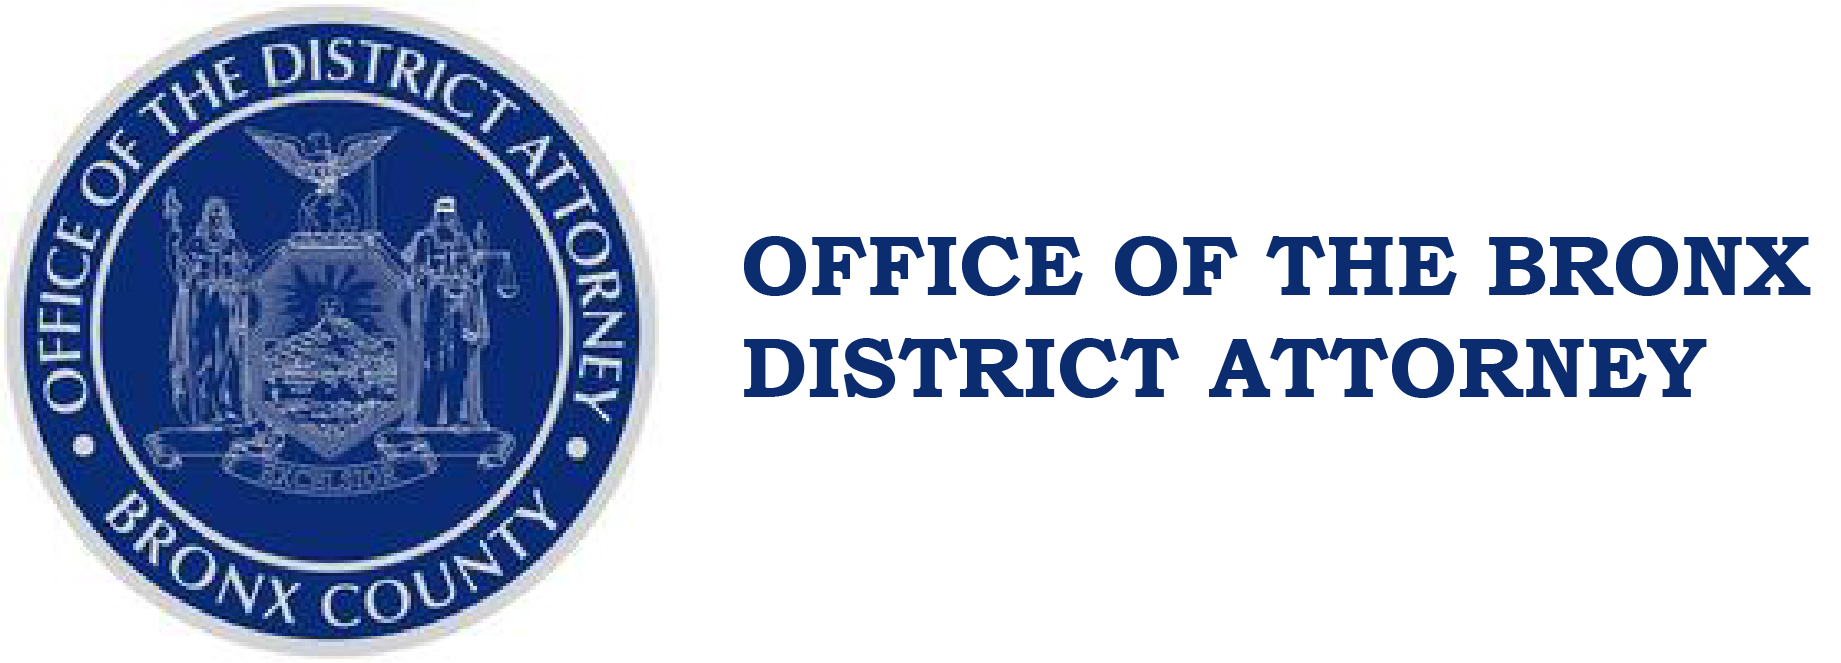 Bronx District Attorney's Office Logo - Emblem of the legal authority overseeing criminal investigations and prosecutions in the Bronx, New York City.